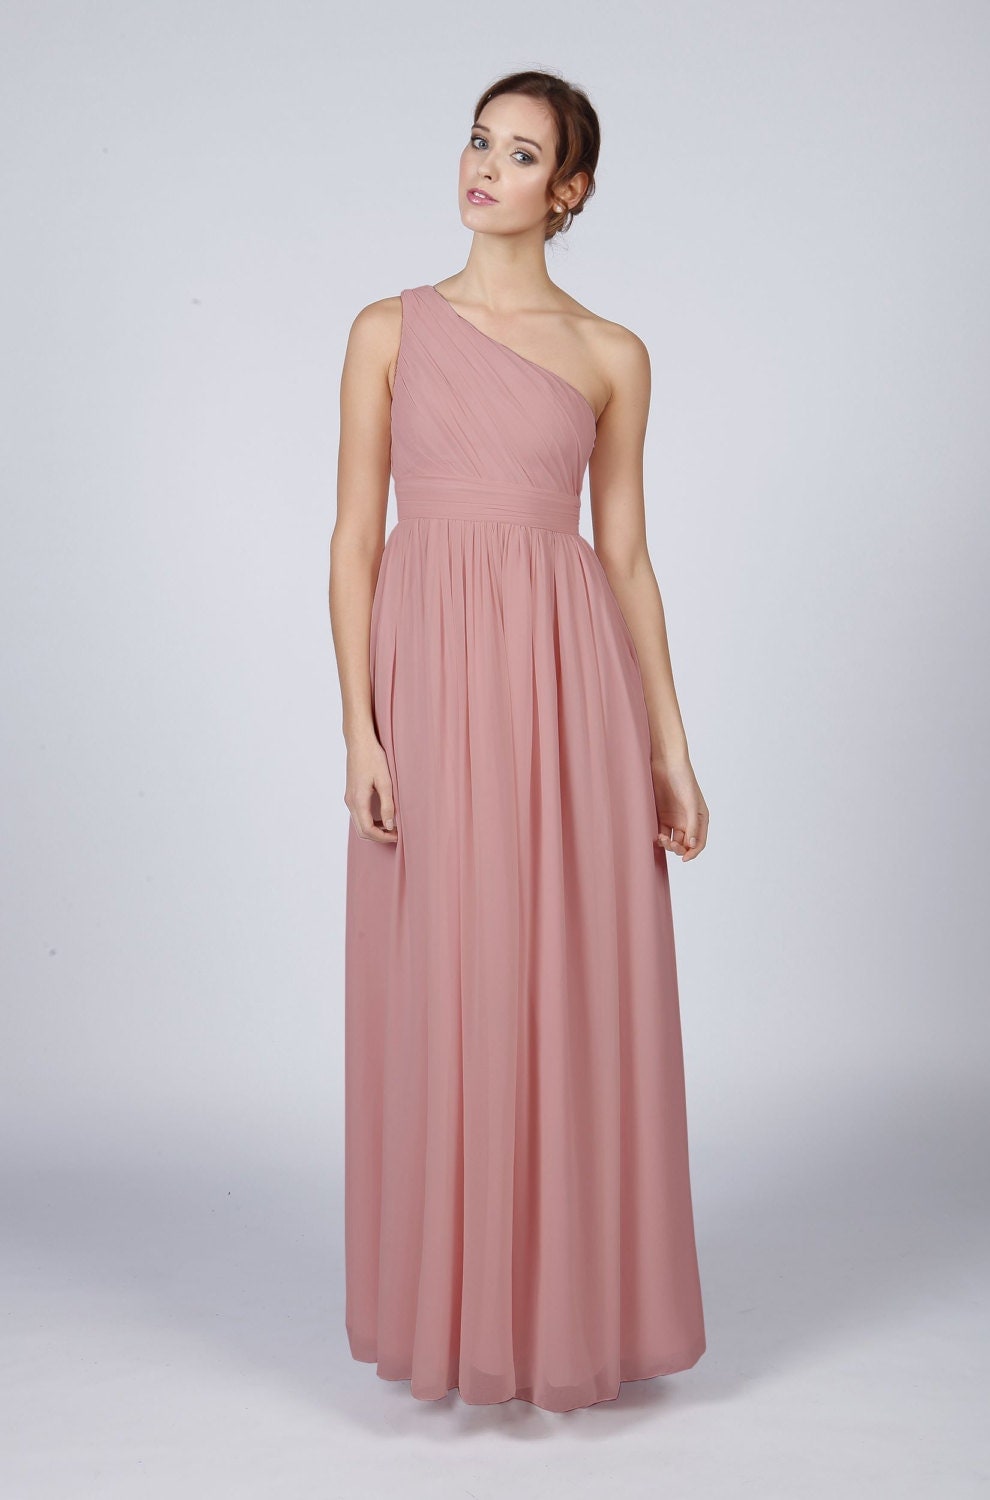  Dusky  Pink  One Shoulder Long Bridesmaid  Prom  Dress  by